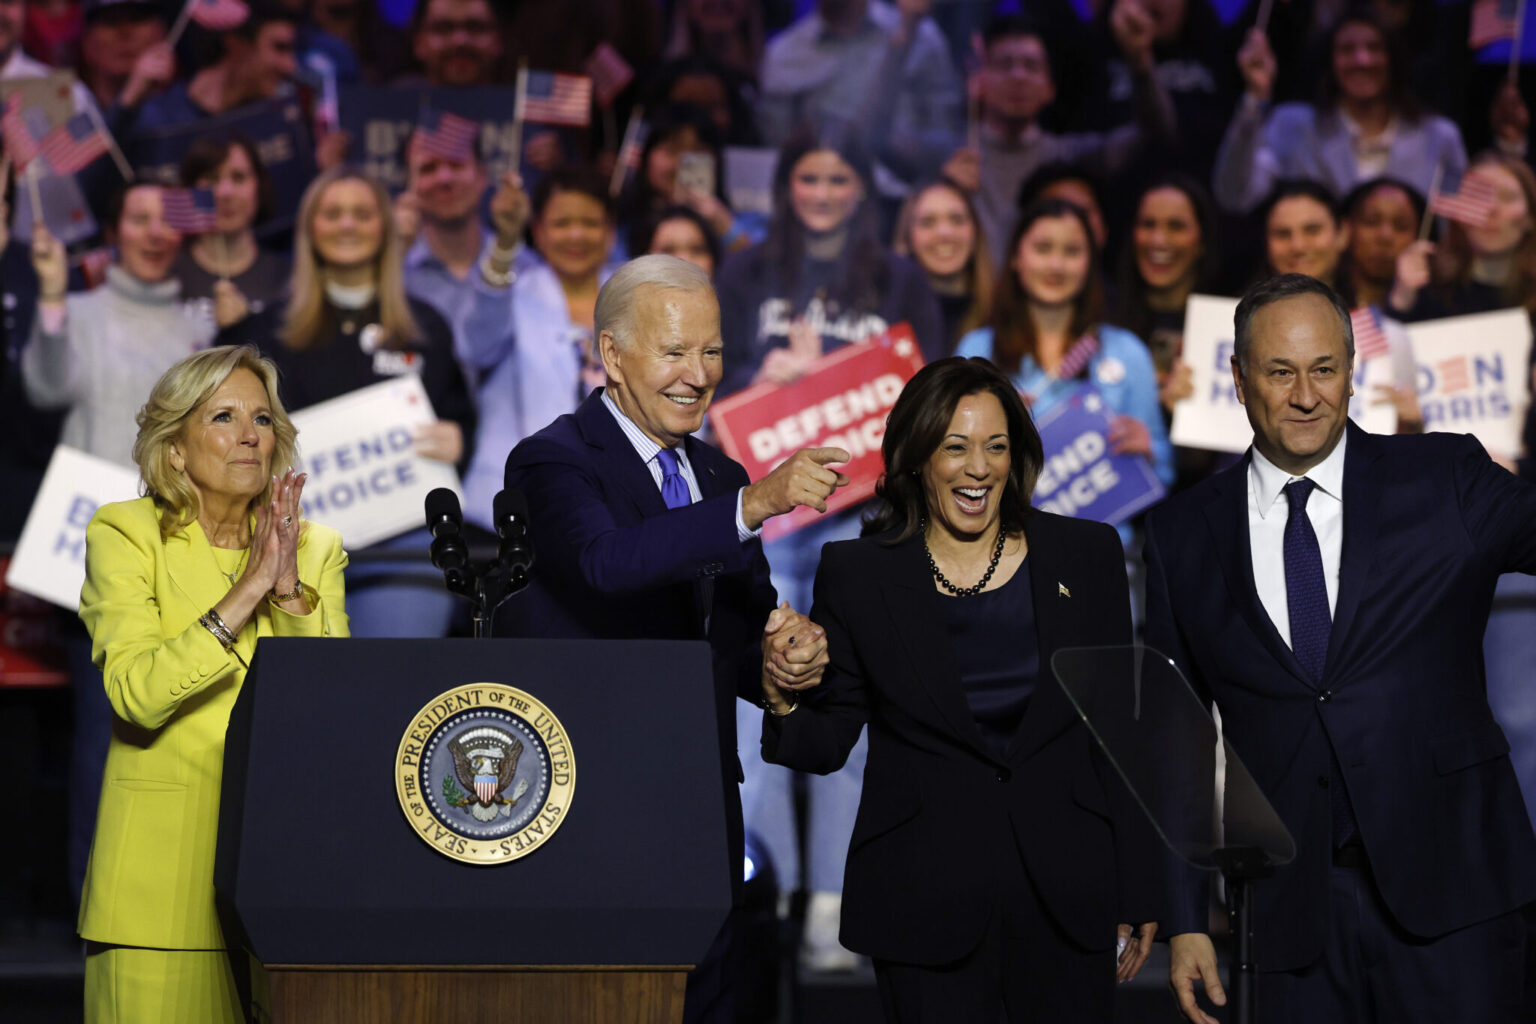 President Biden Dropped Out of 2024 Race. What Does This Mean?